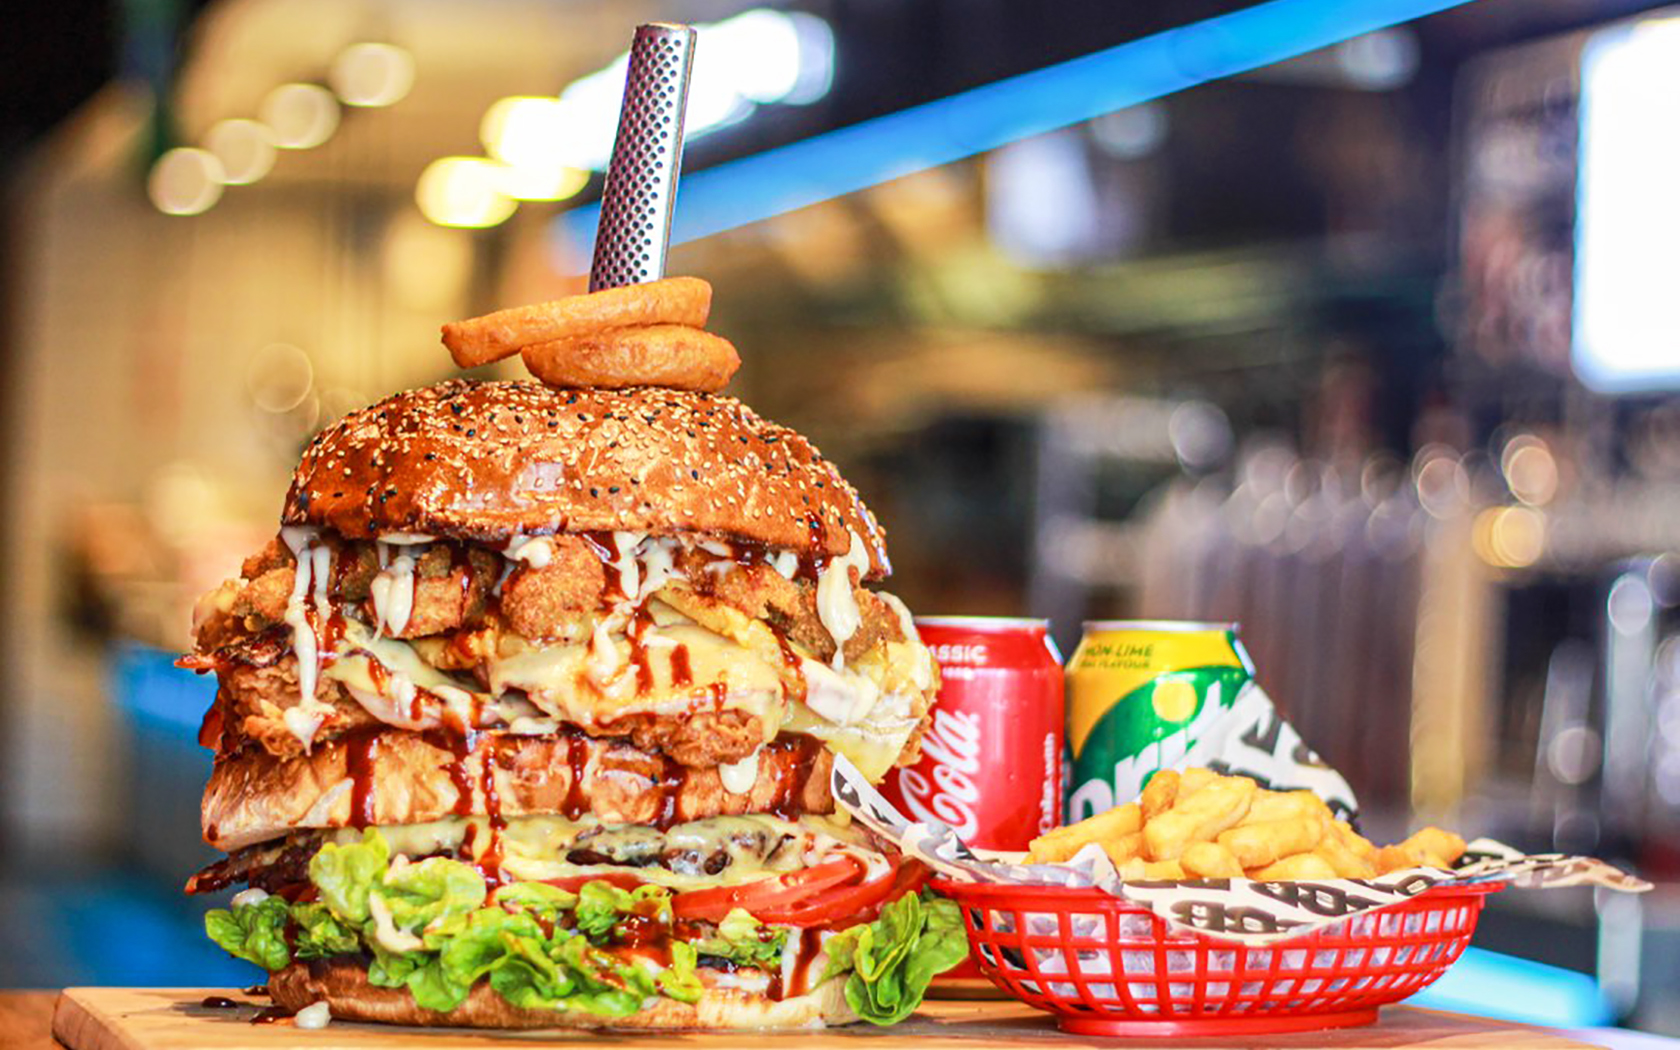 Beer And Burger Bar: Could You Finish The Don 2.0 Food Challenge?